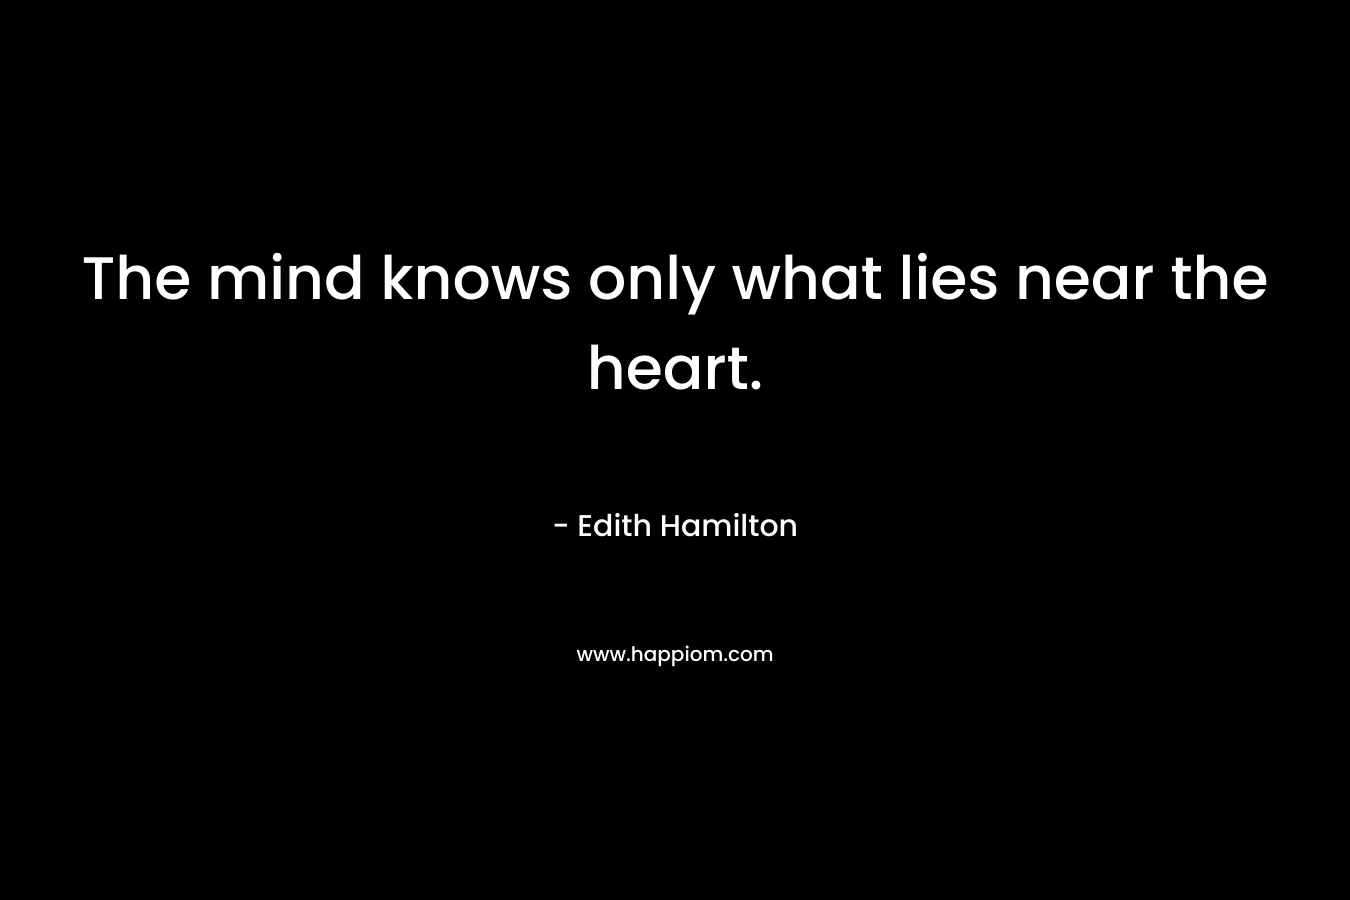 The mind knows only what lies near the heart.